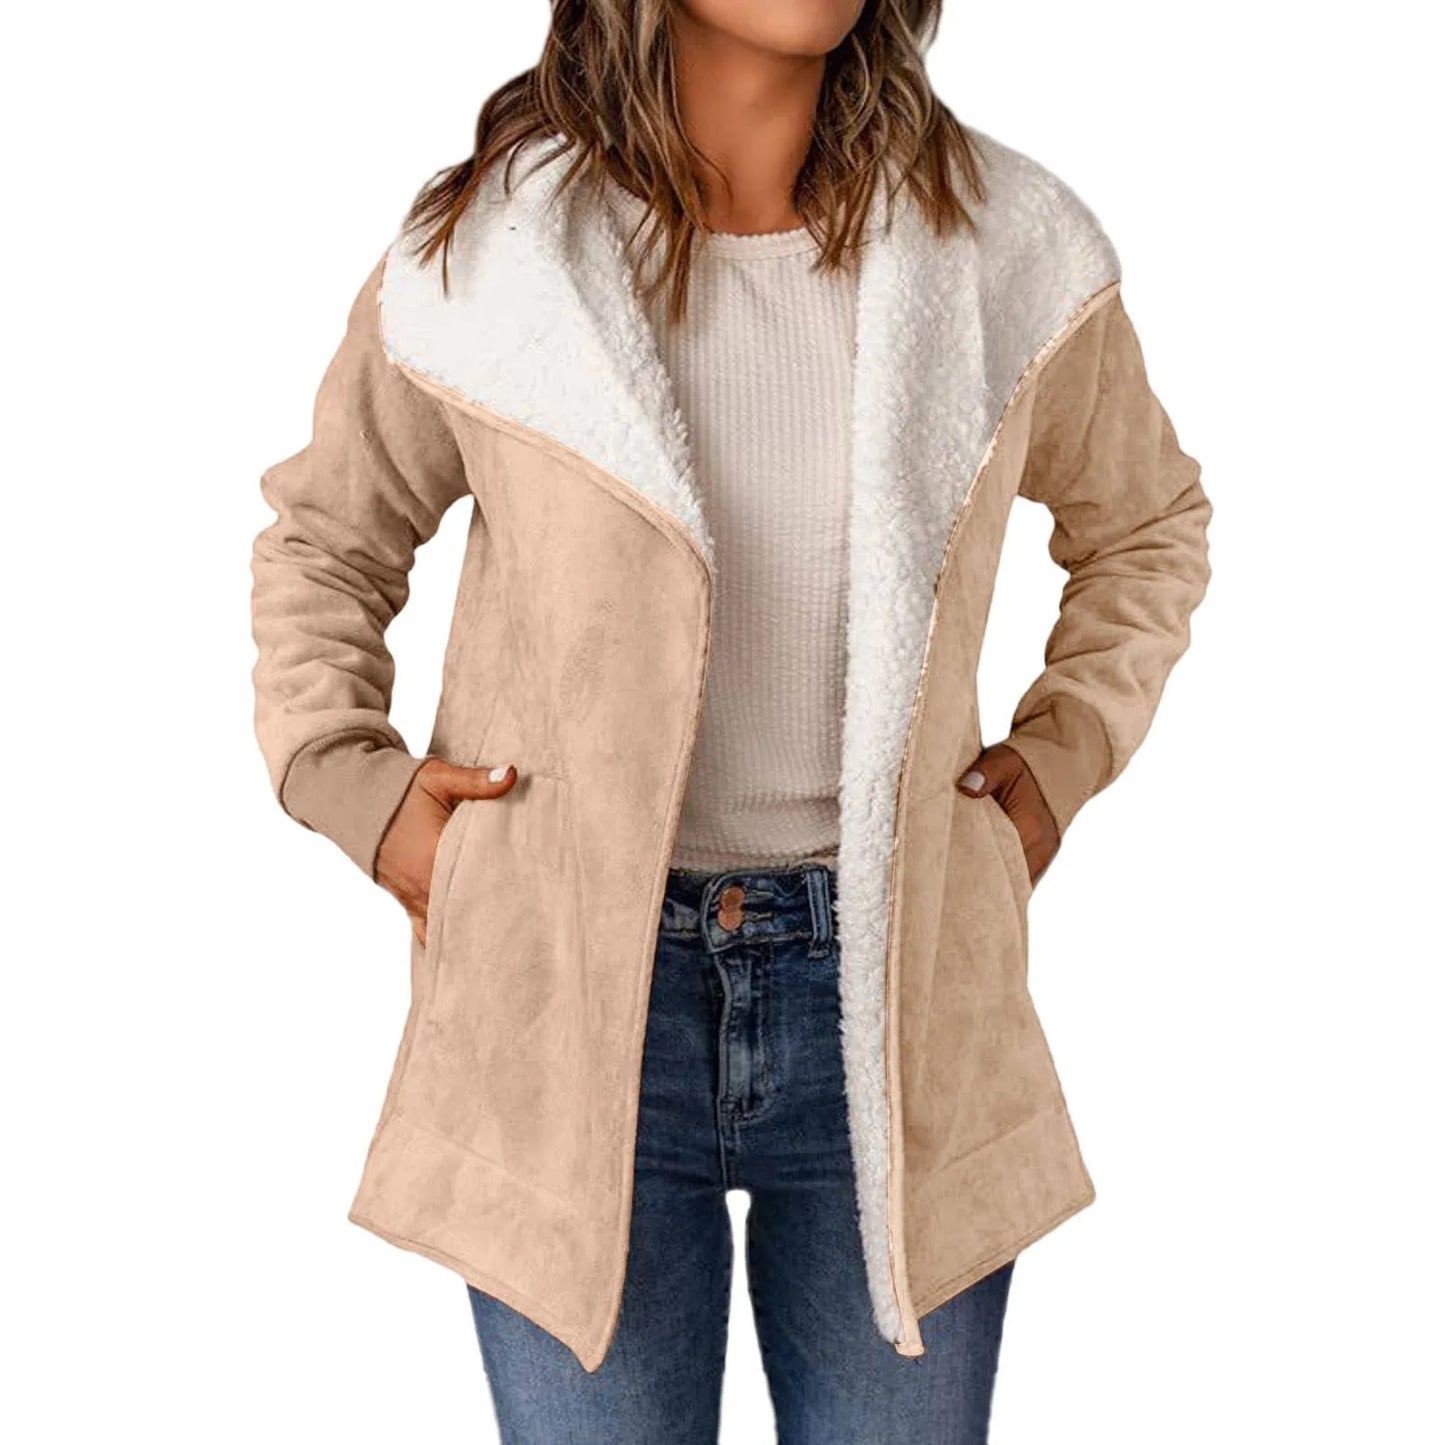 Casual Suede Leather Jackets Fall And Winter Long Sleeved Lamb Wool Fleece Coats Ladies Lapel Cardigan Cotton Coat